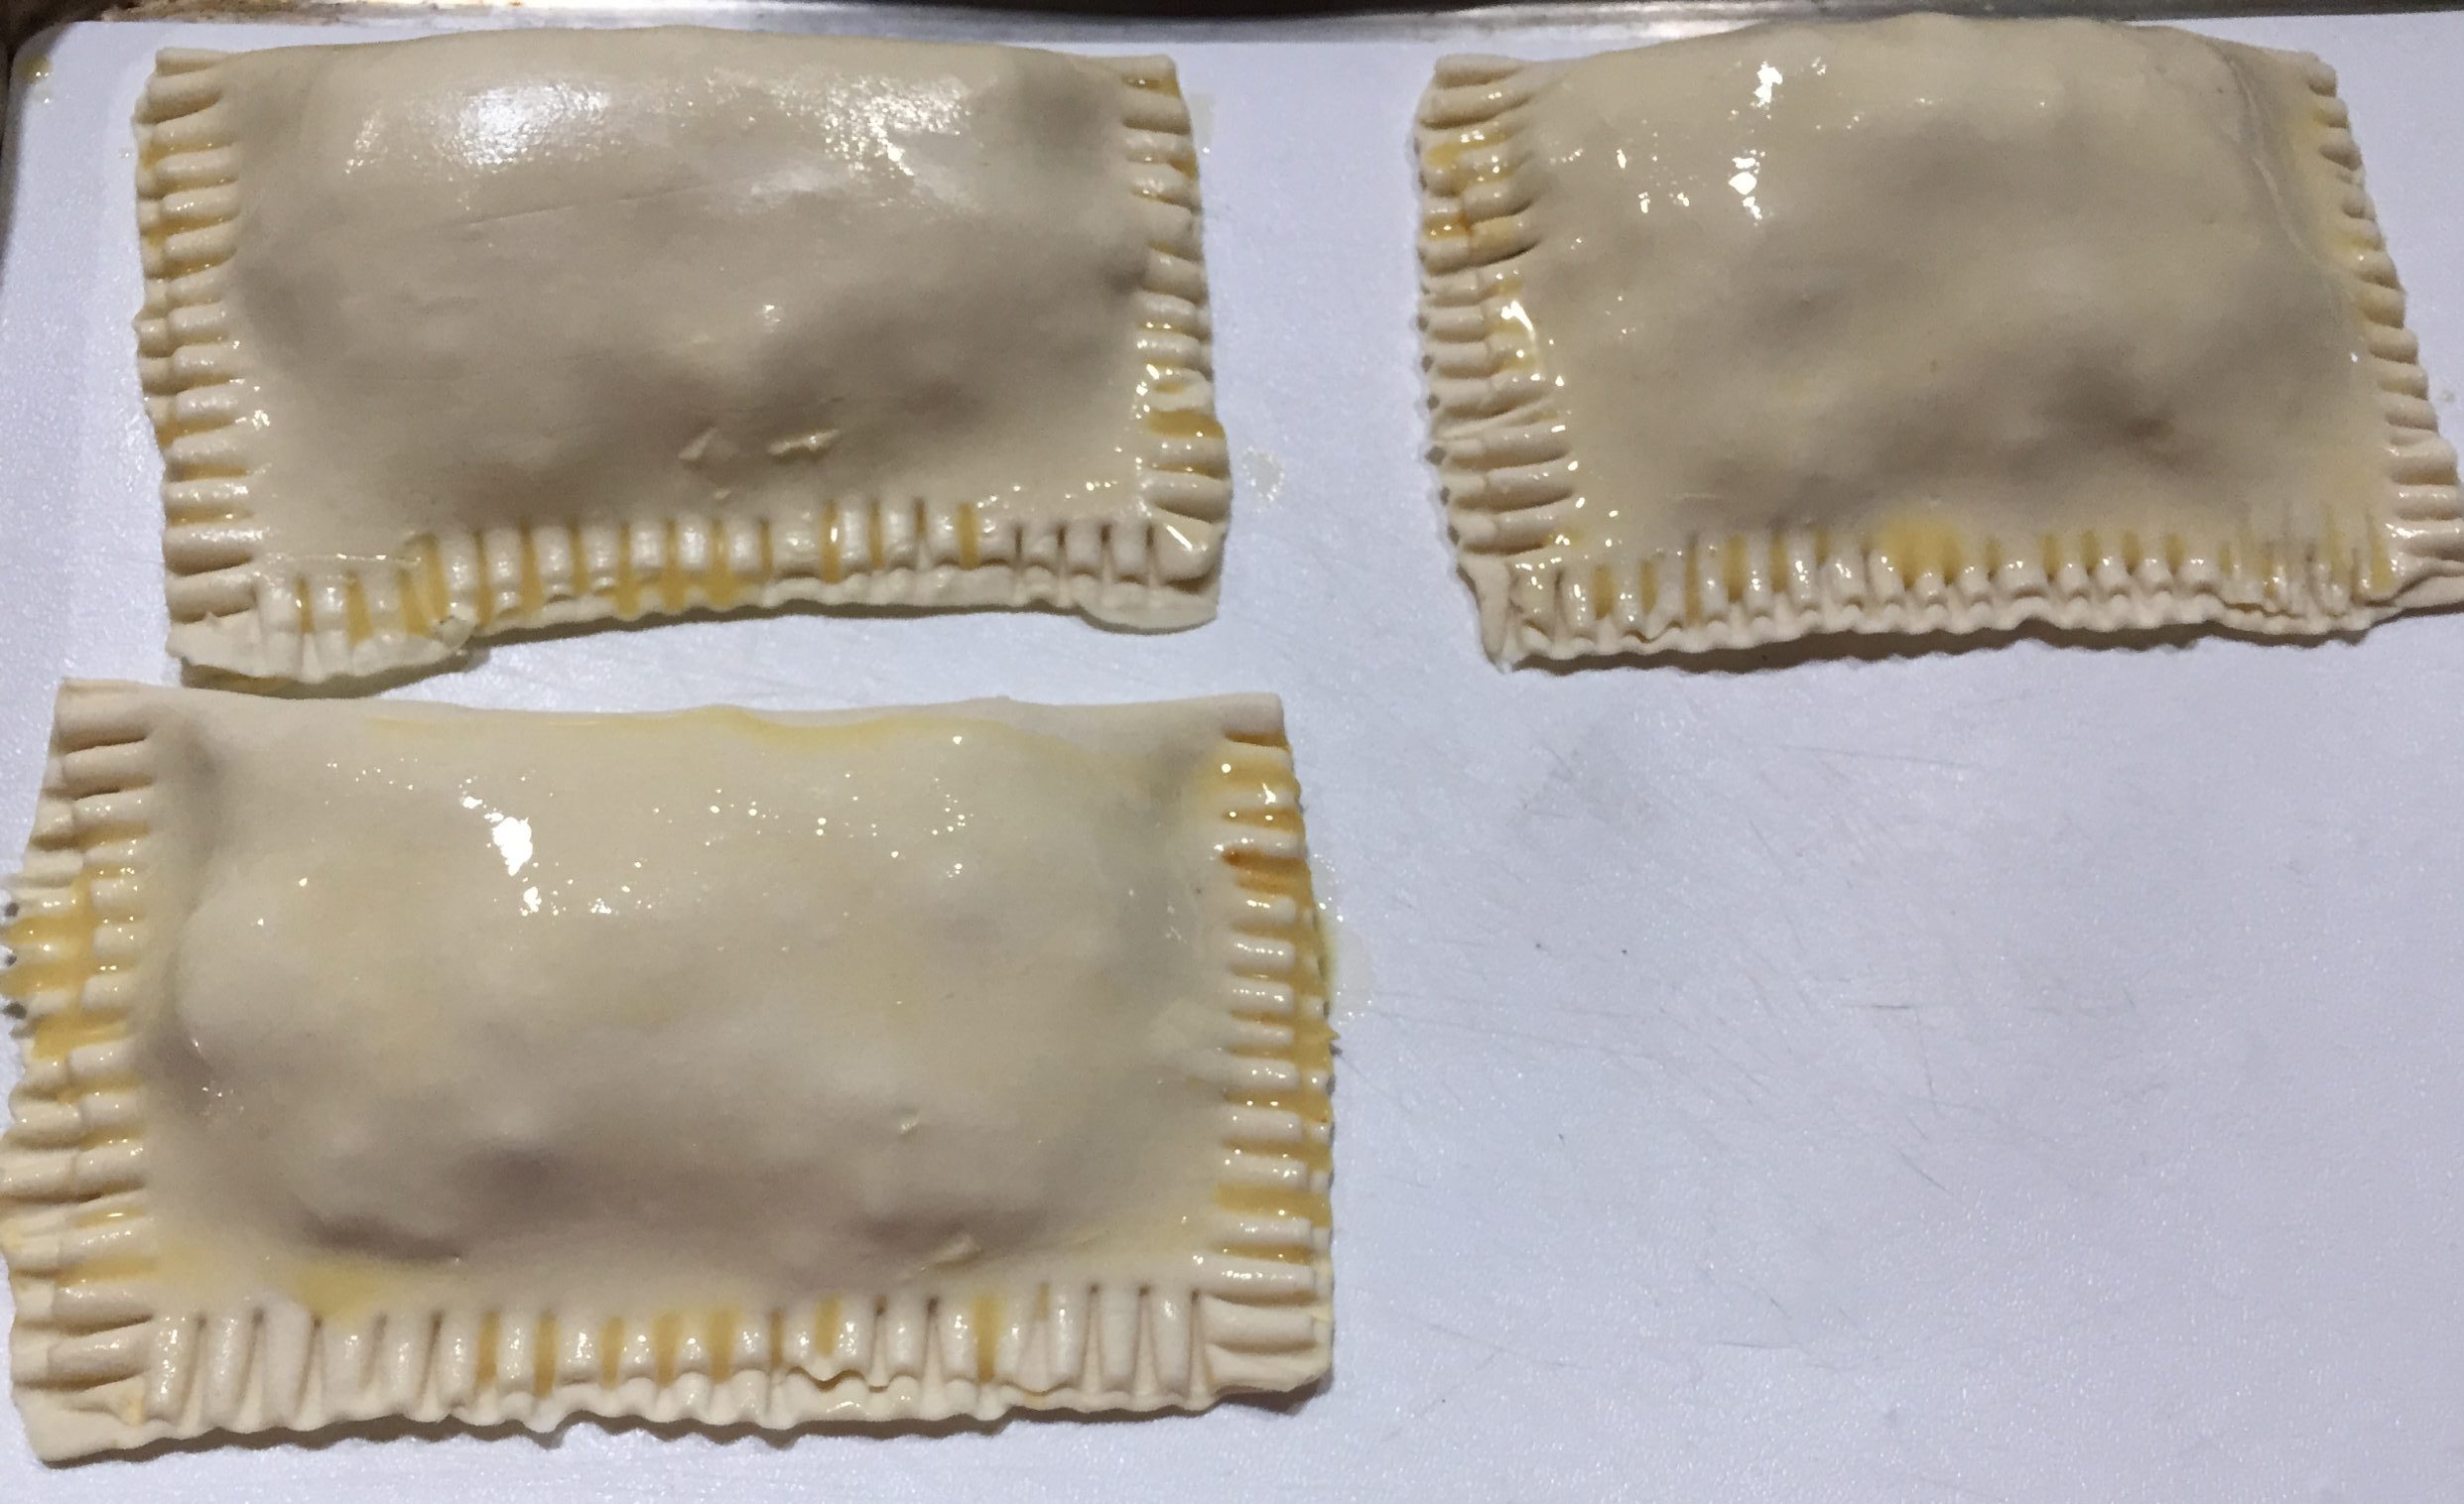 Pies with egg wash for a glossy finish